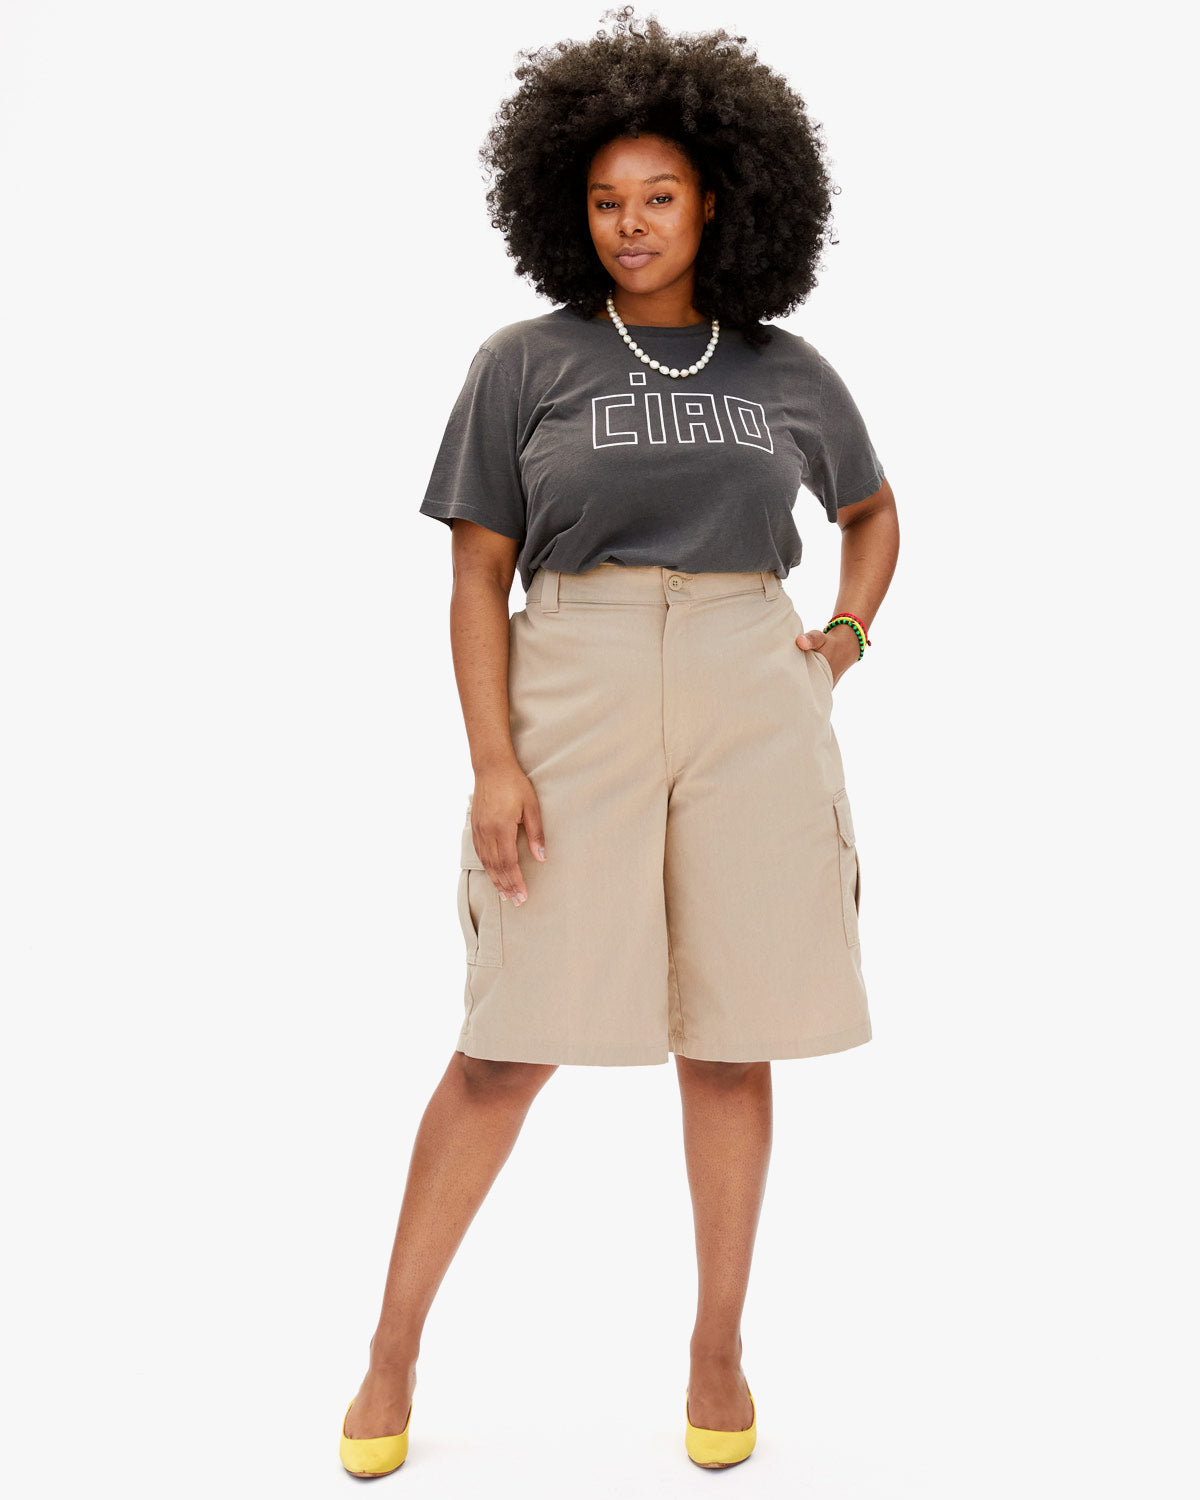 Candace in Tan Long Shorts with the Faded Black with Ciao Original Tee Tucked In